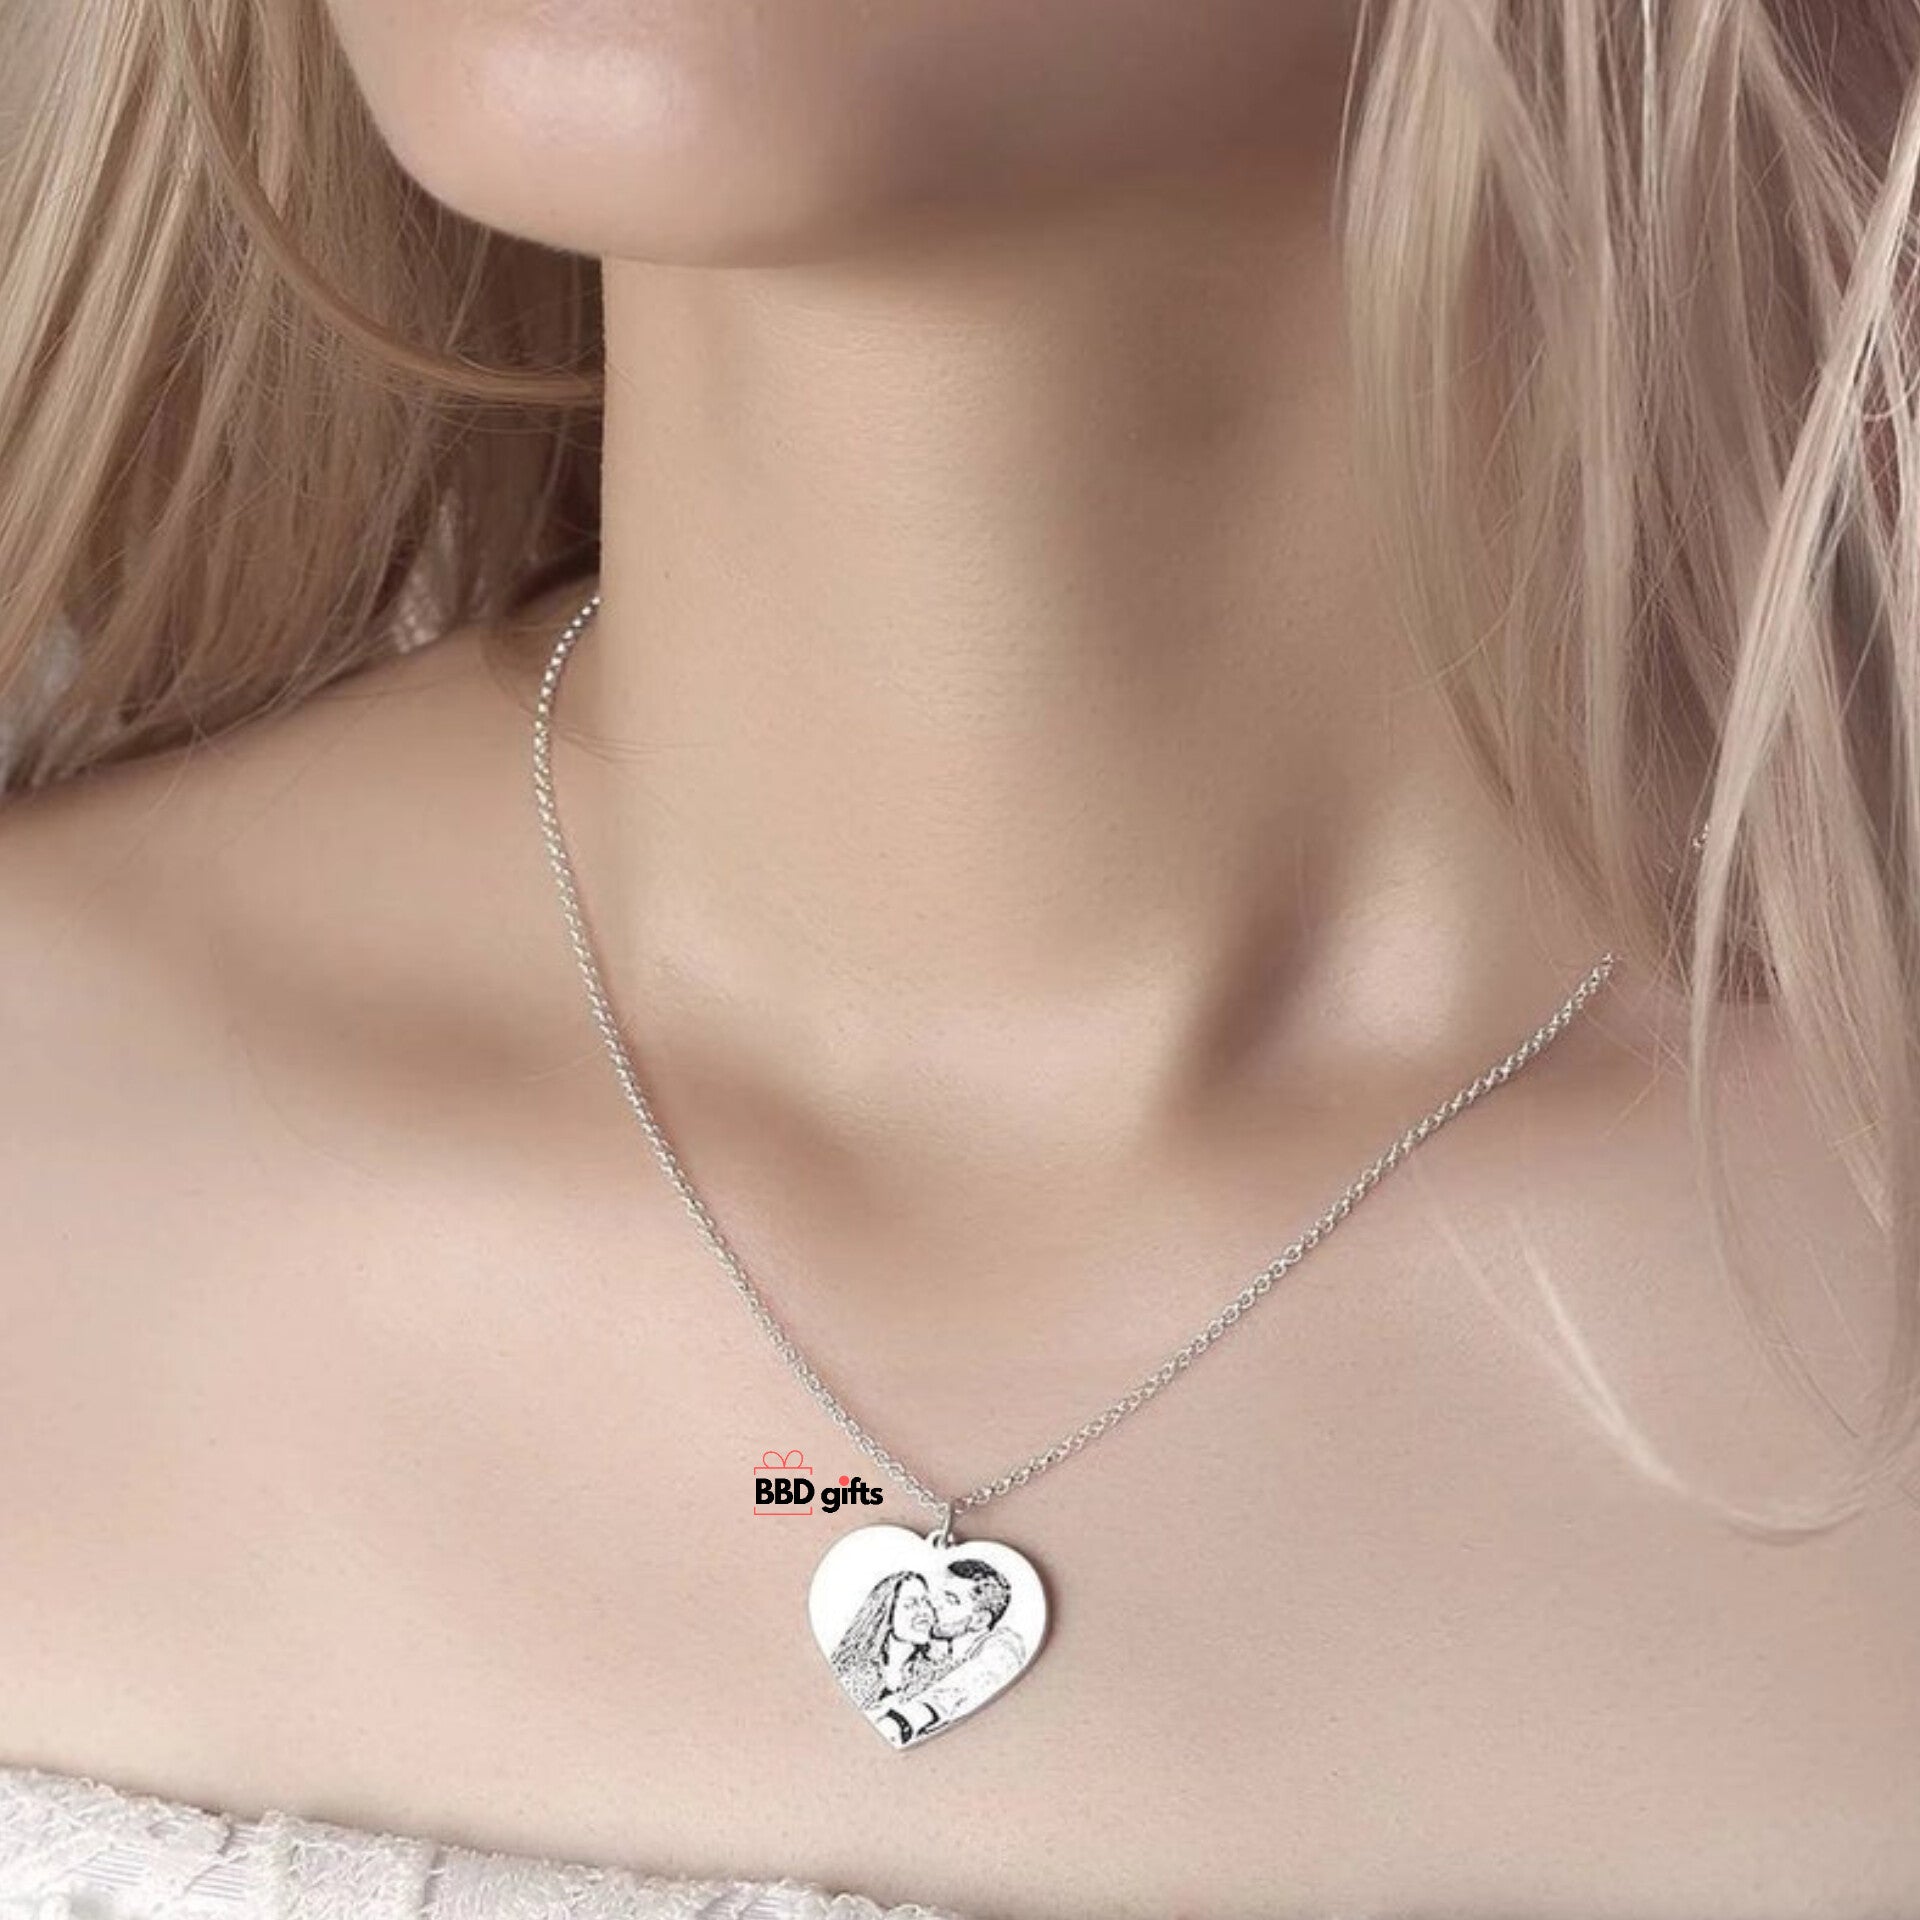 Charming Personalized Silver Heart Locket Necklace